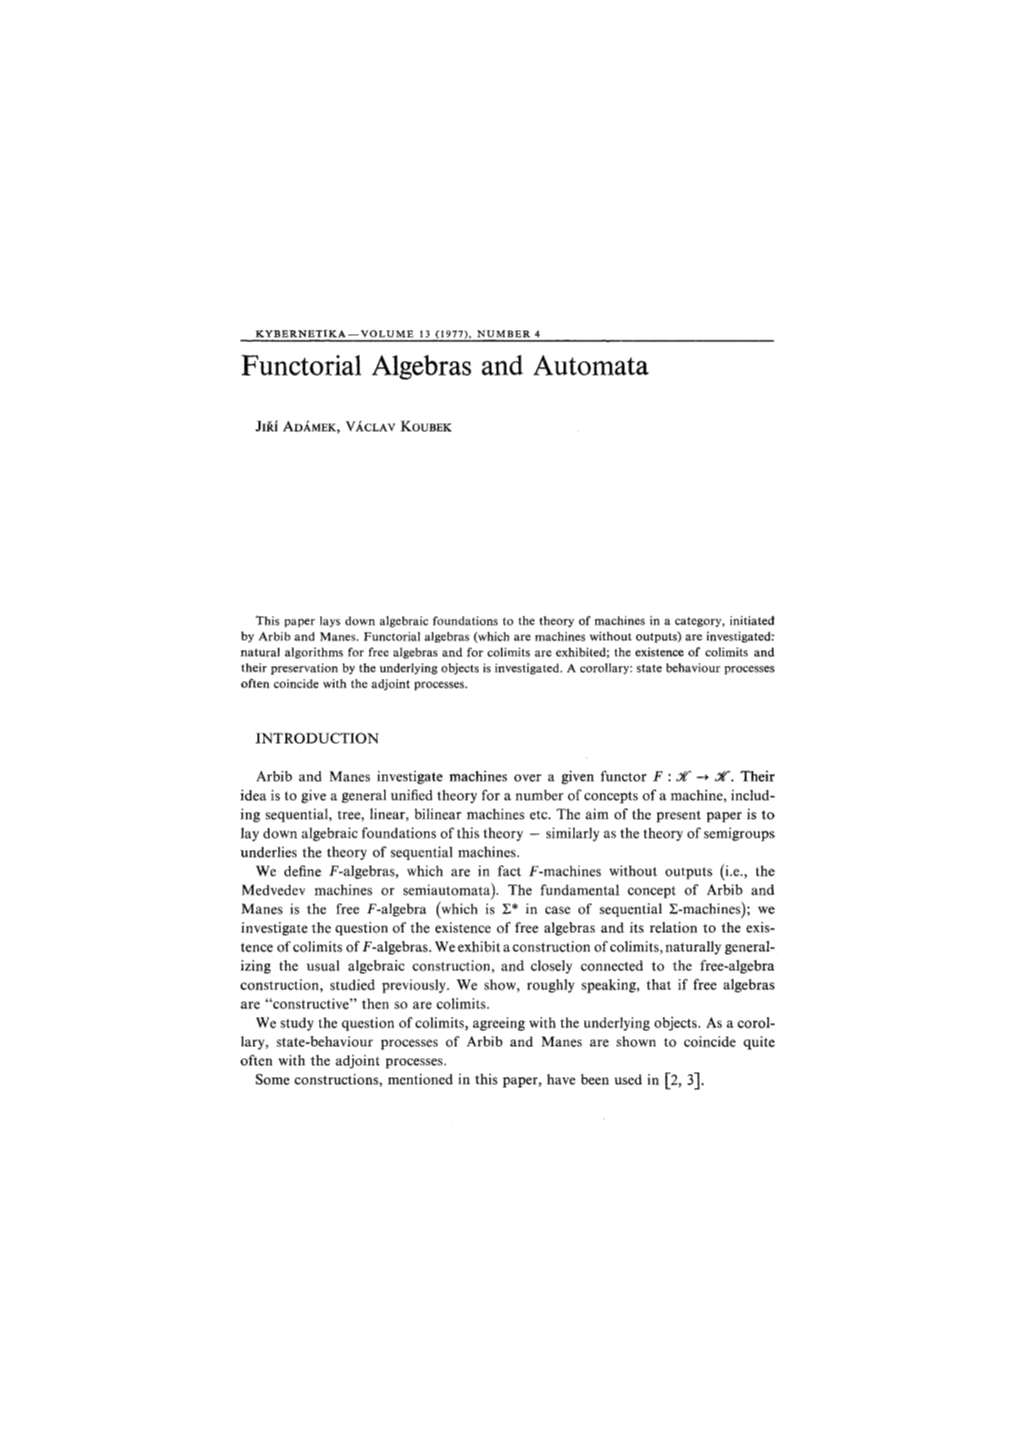 Functorial Algebras and Automata